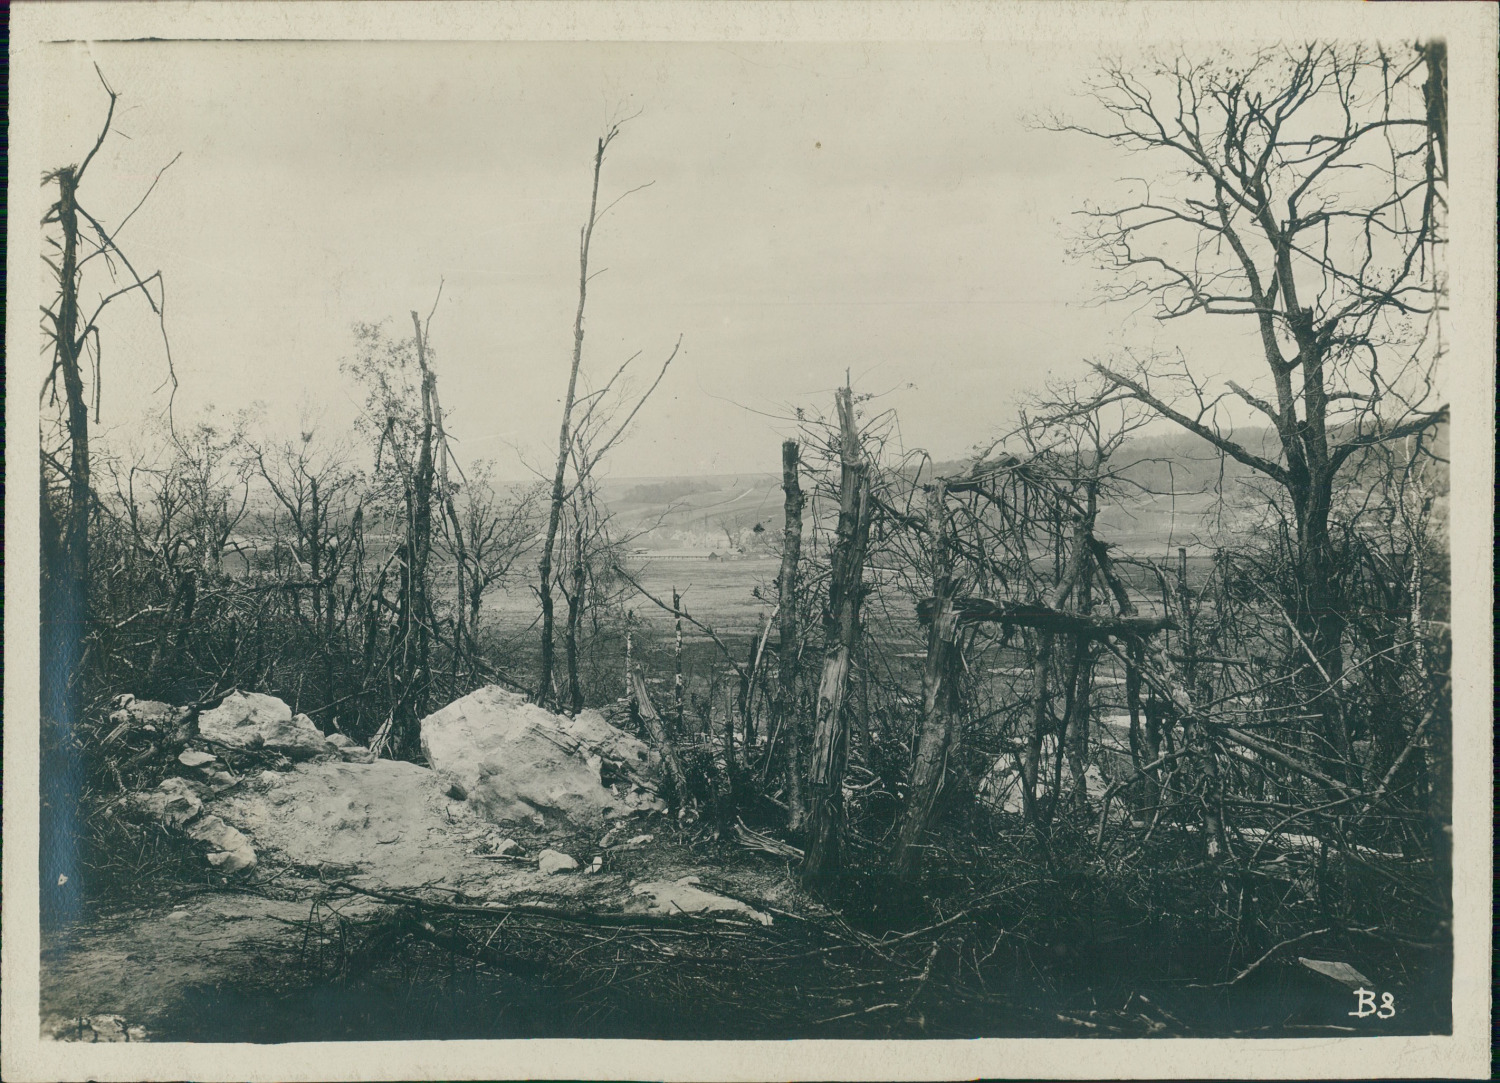 France, War 14/18, Aisne, The ruins of the forest of Belleau at the entrance of